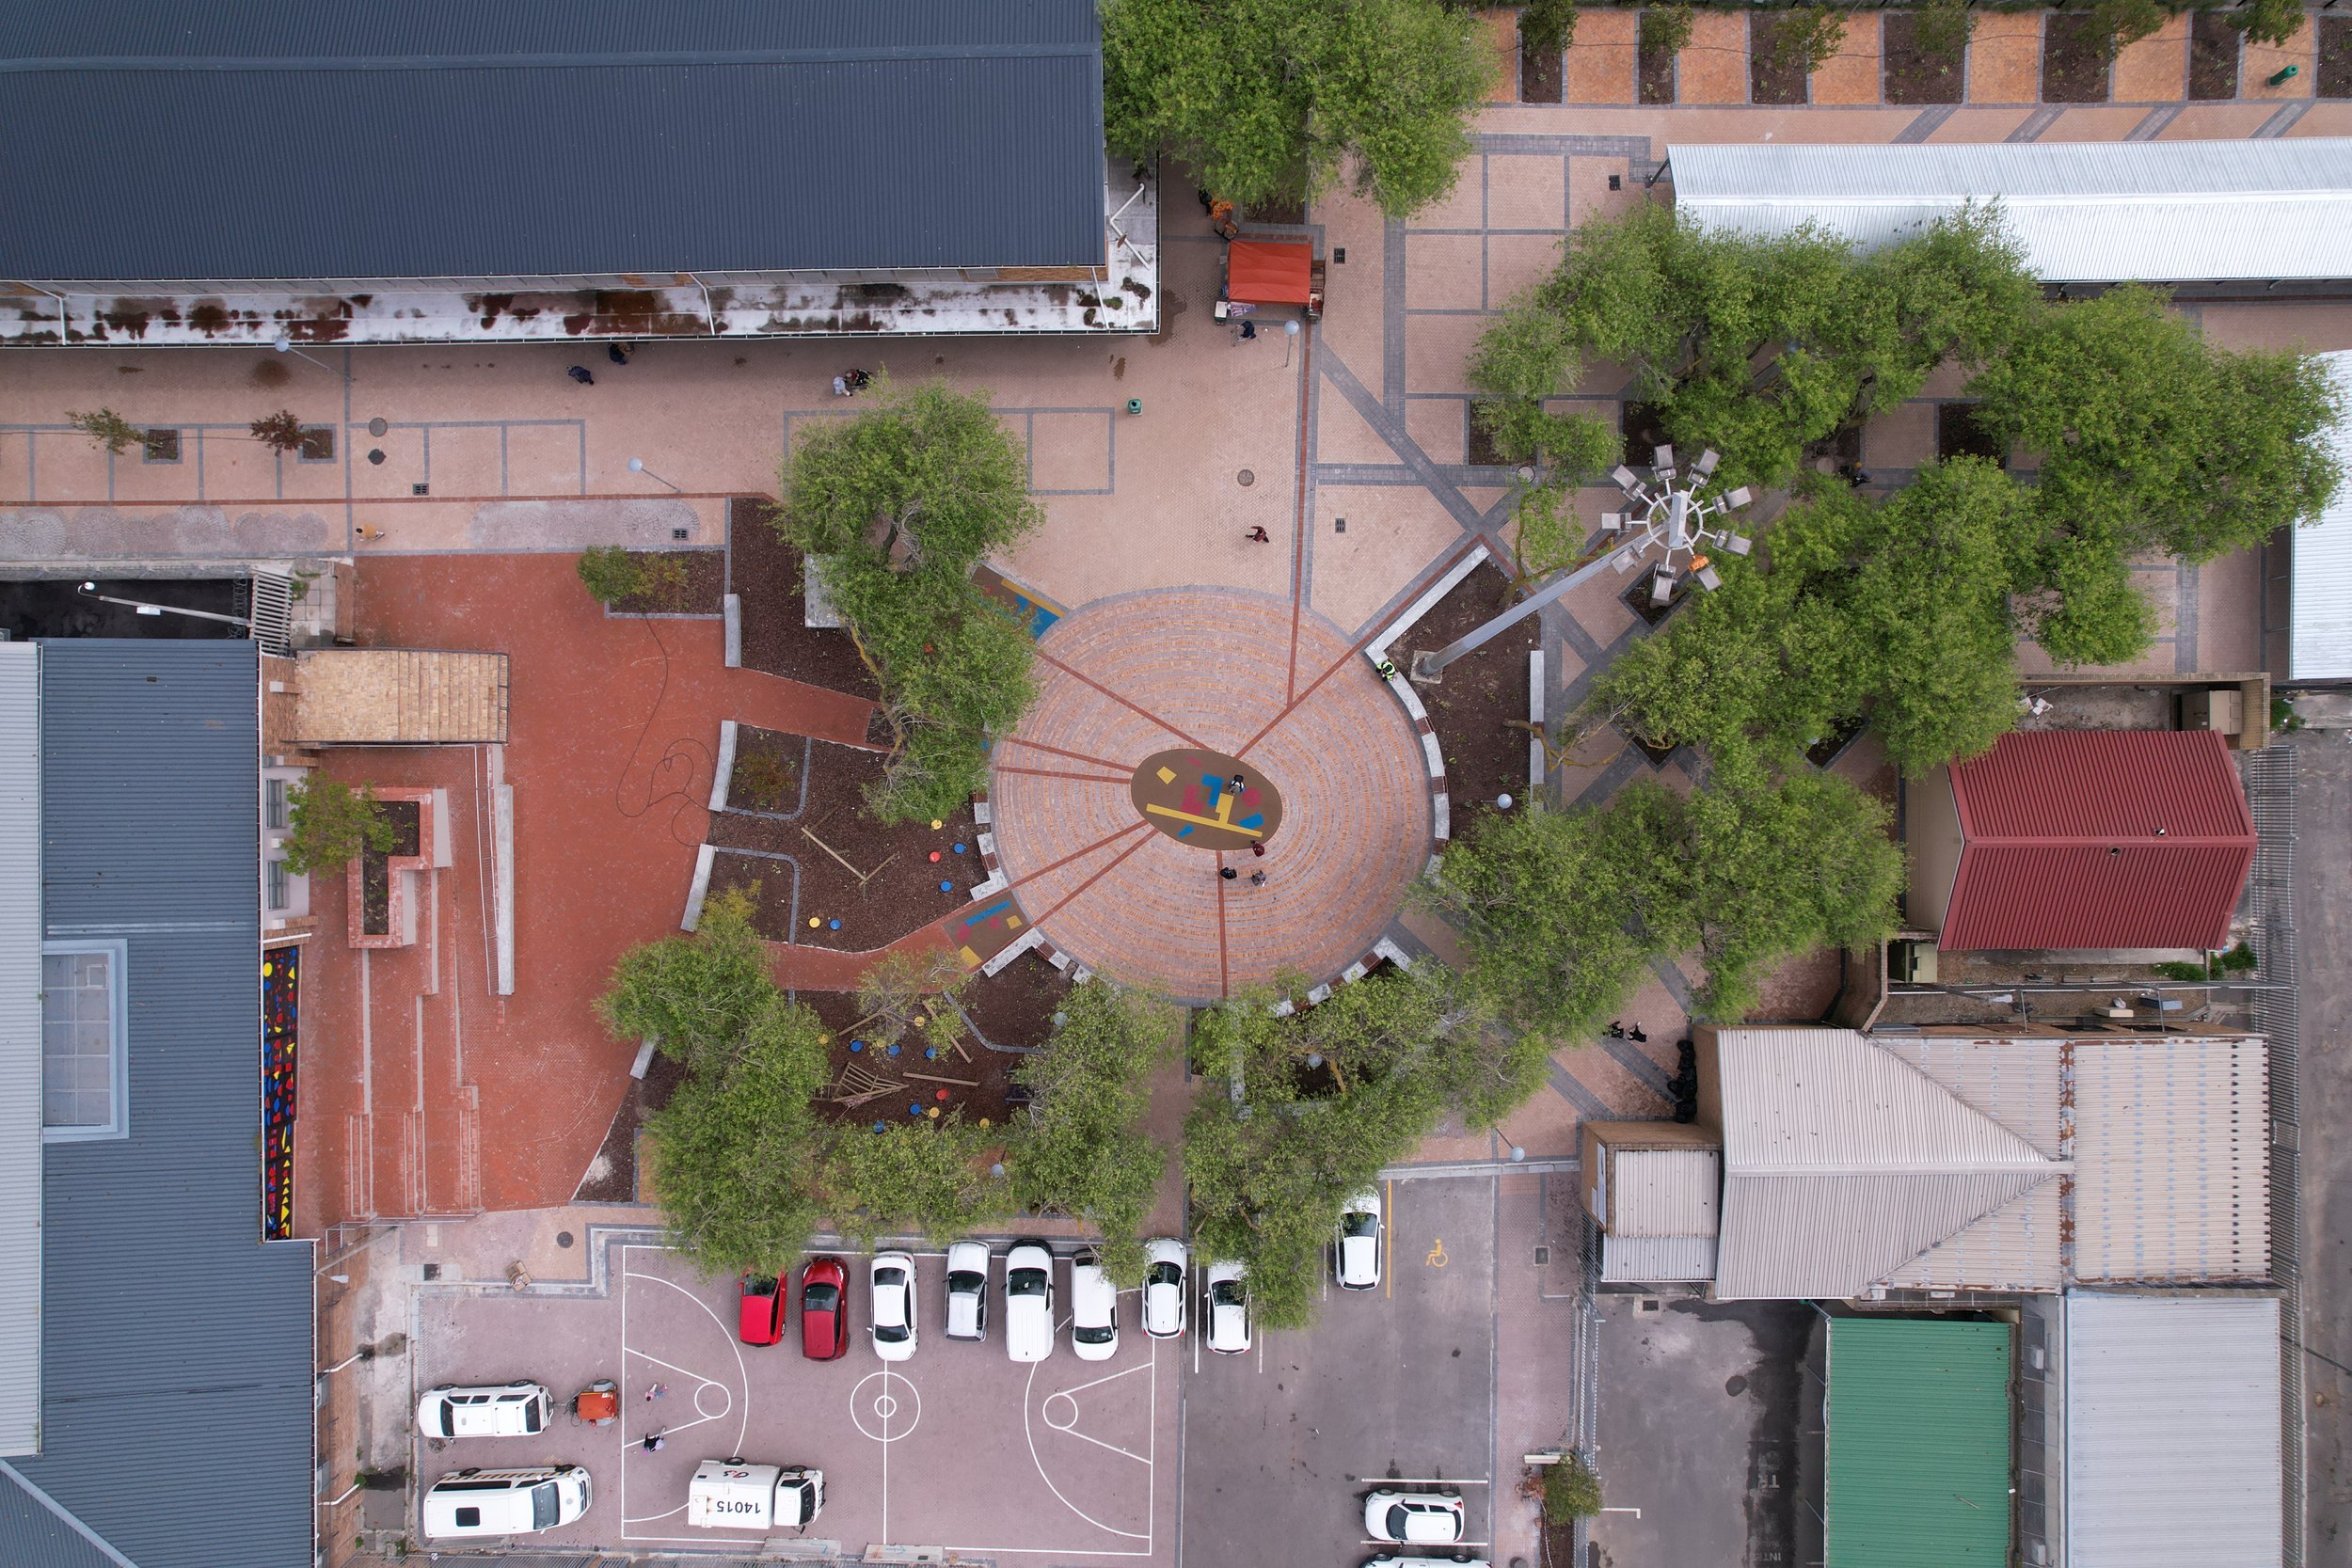  Aerial view of site (image curtesy of City of Cape Town) 